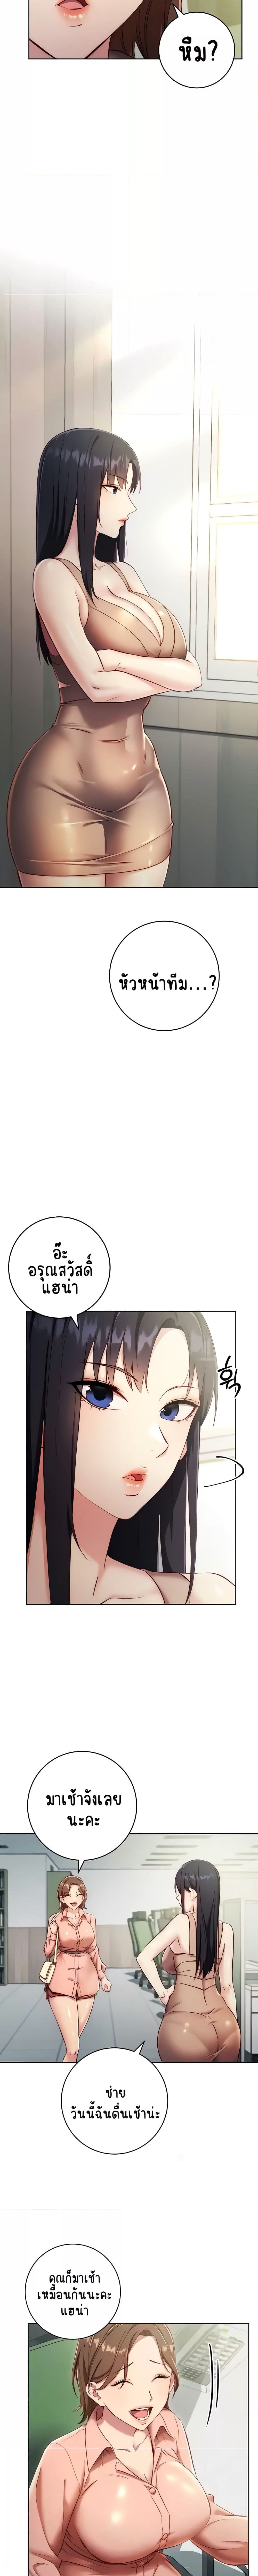 Outsider: The Invisible Man ตอนที่ 4 ภาพ 1